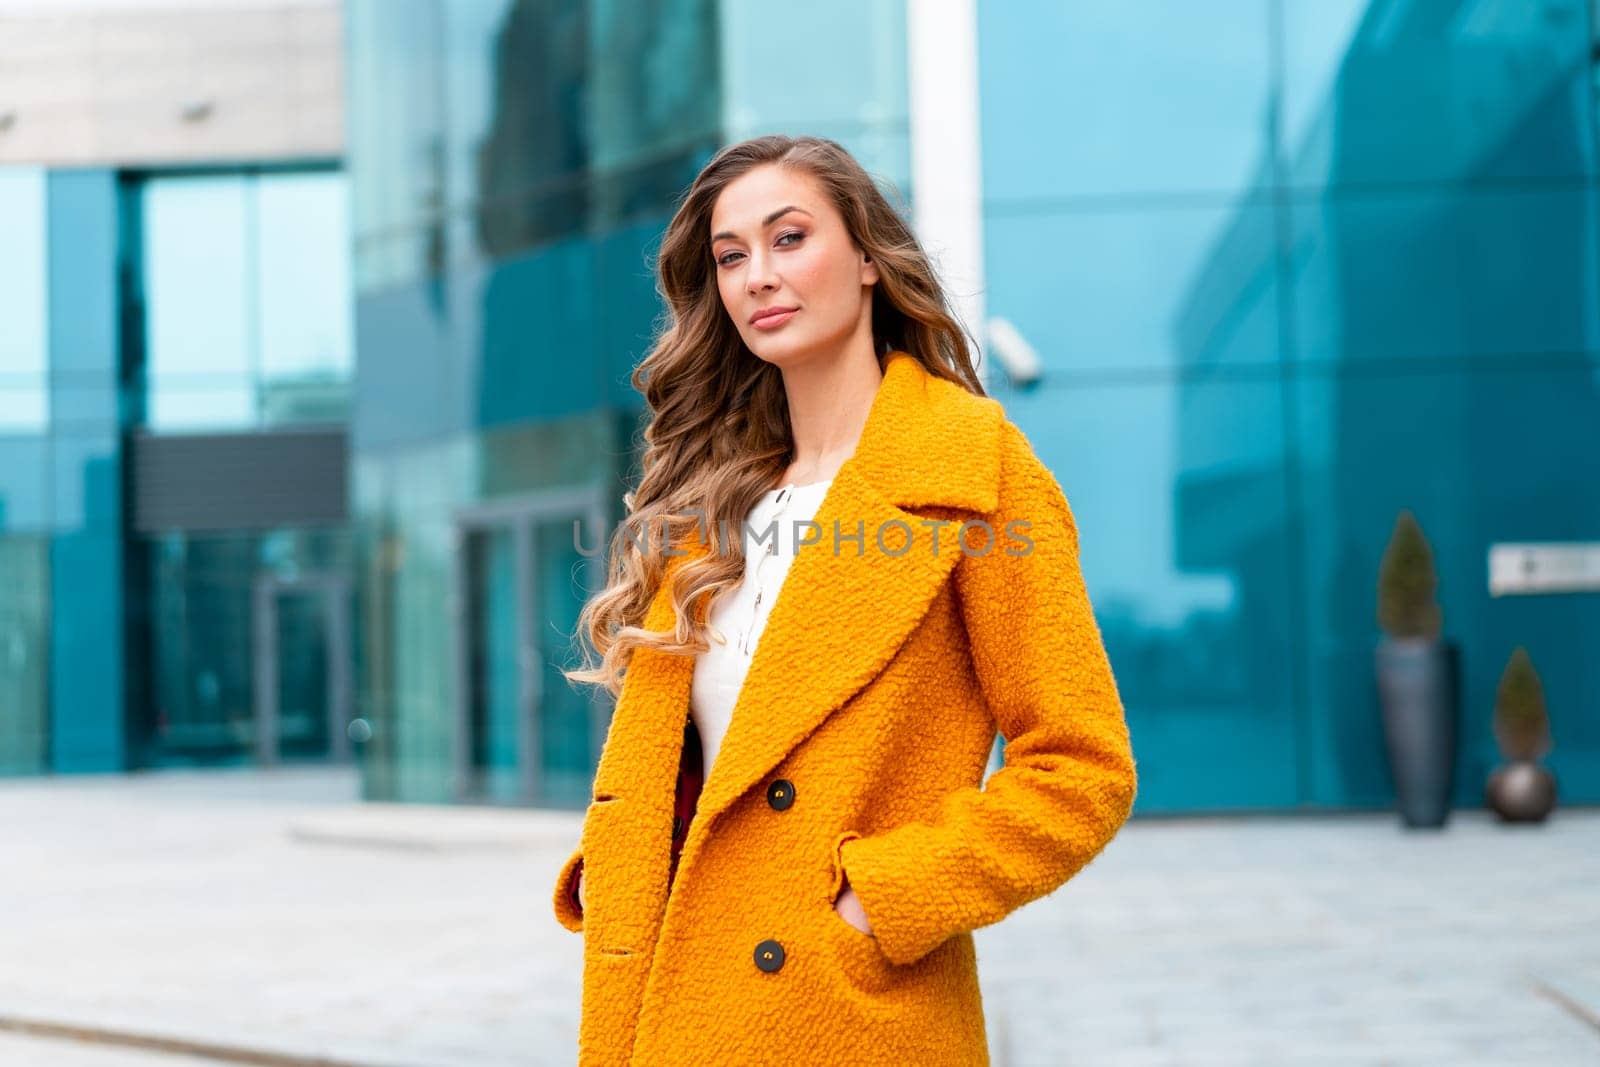 Business woman dressed yellow coat standing outdoors corporative building background Caucasian female business person on city street near office building with windows Stylish businesswoman